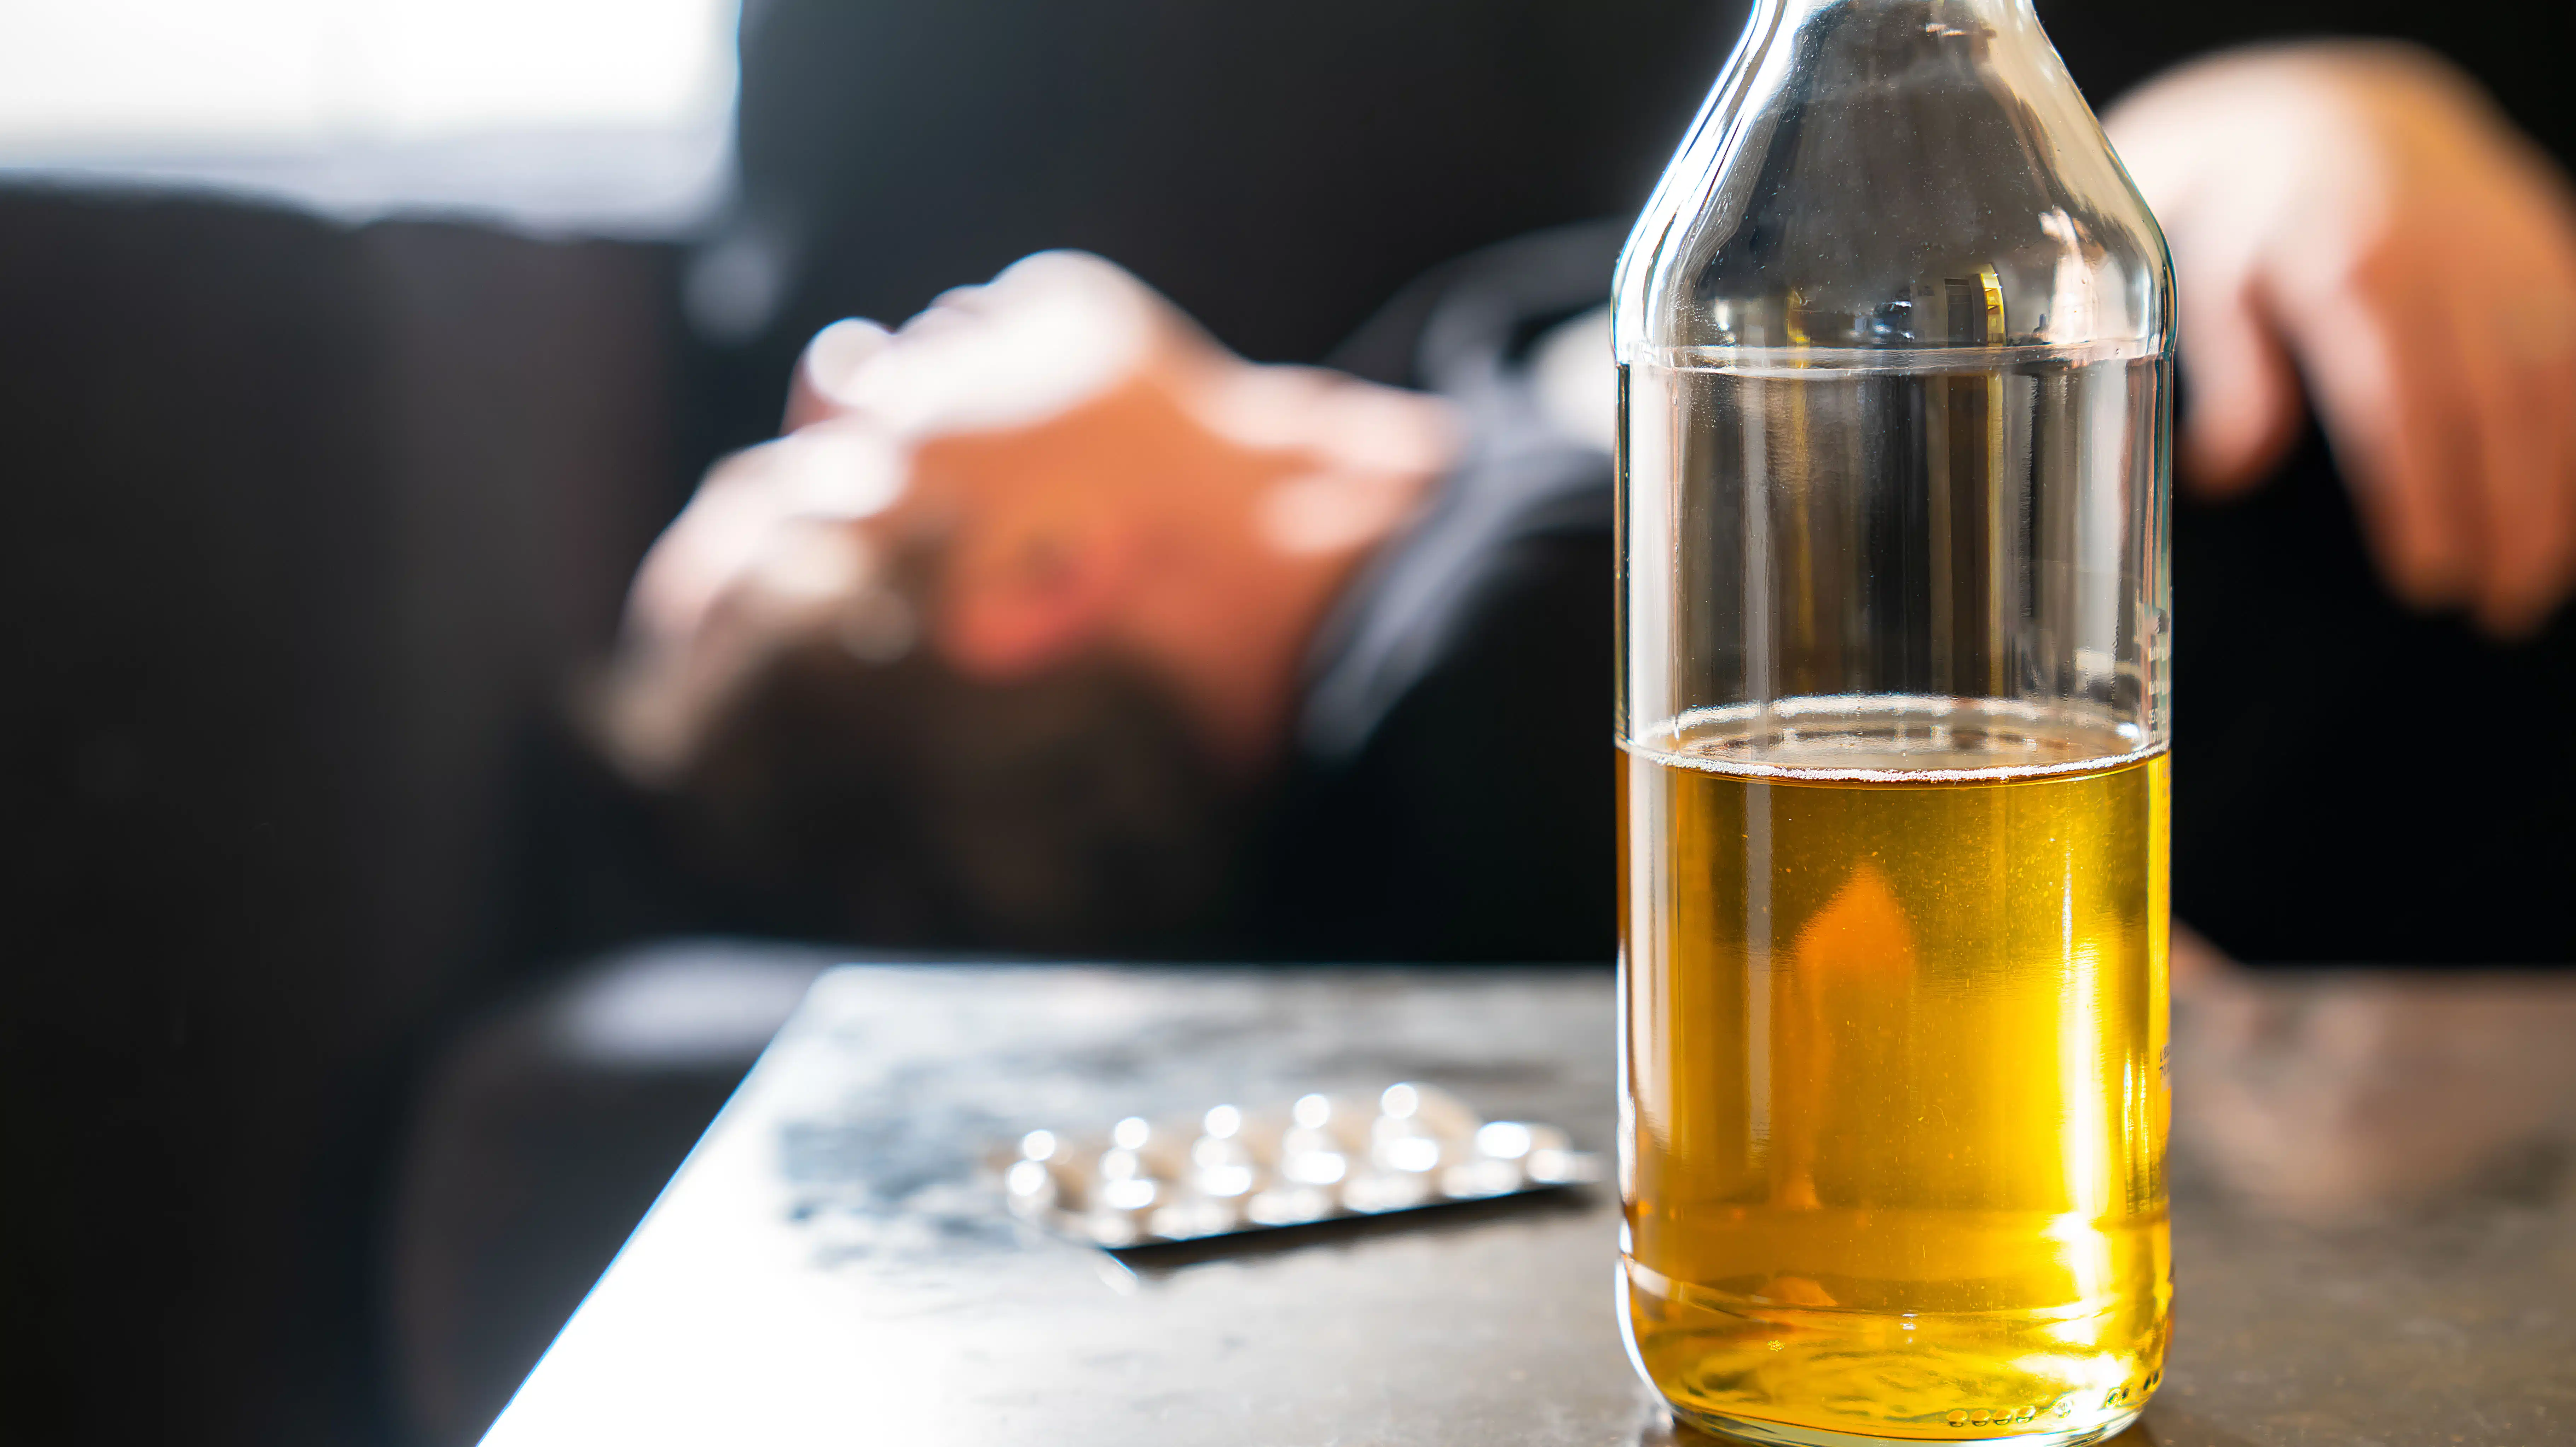 A beer bottle sits on a table next to a blister pack of pills - Can You Drink Alcohol On Painkillers